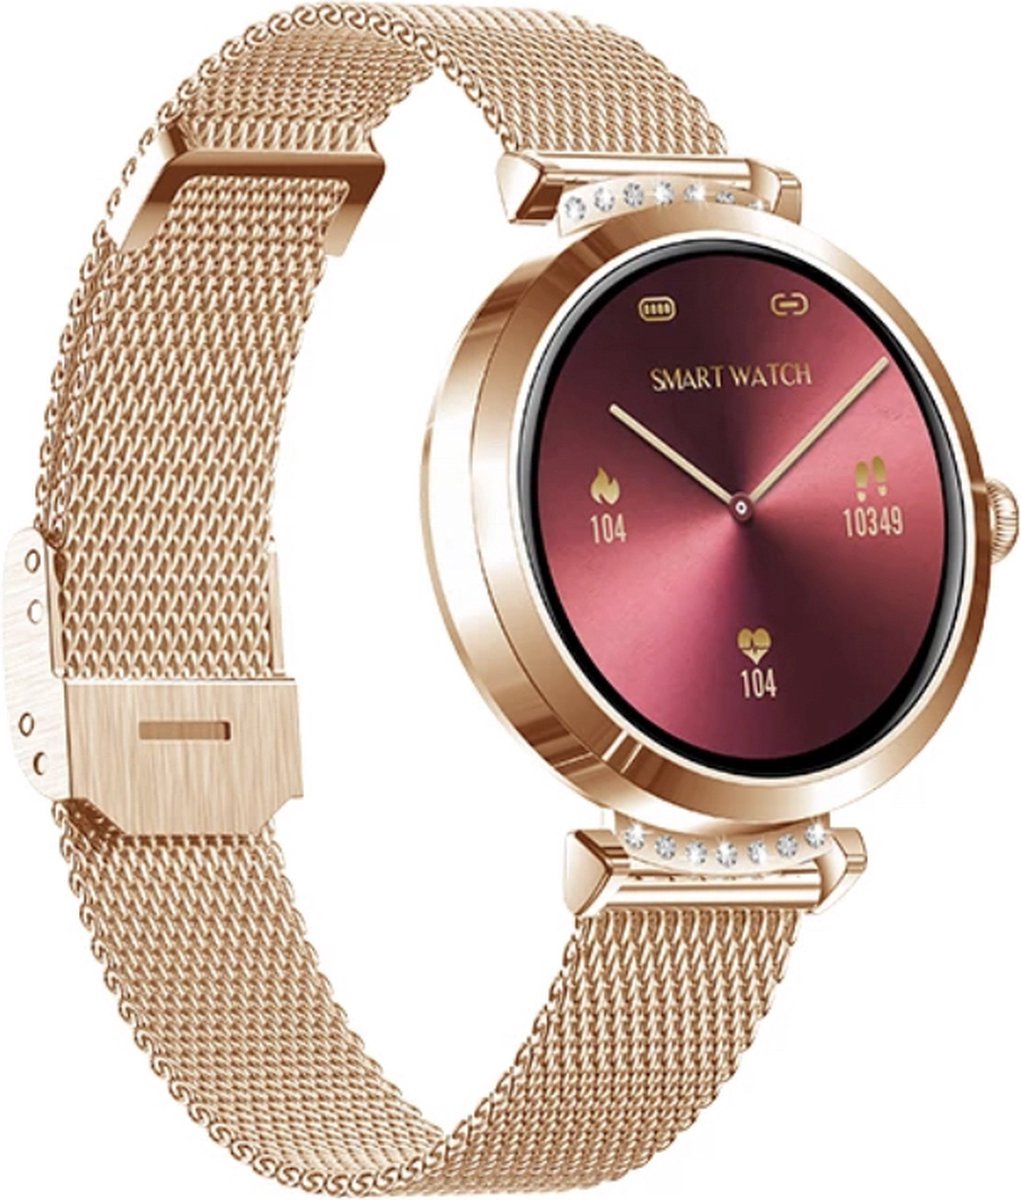 Montre Connectée Femme Or Rose T18 - Samsung - Android - Apple - iOS - 44mm